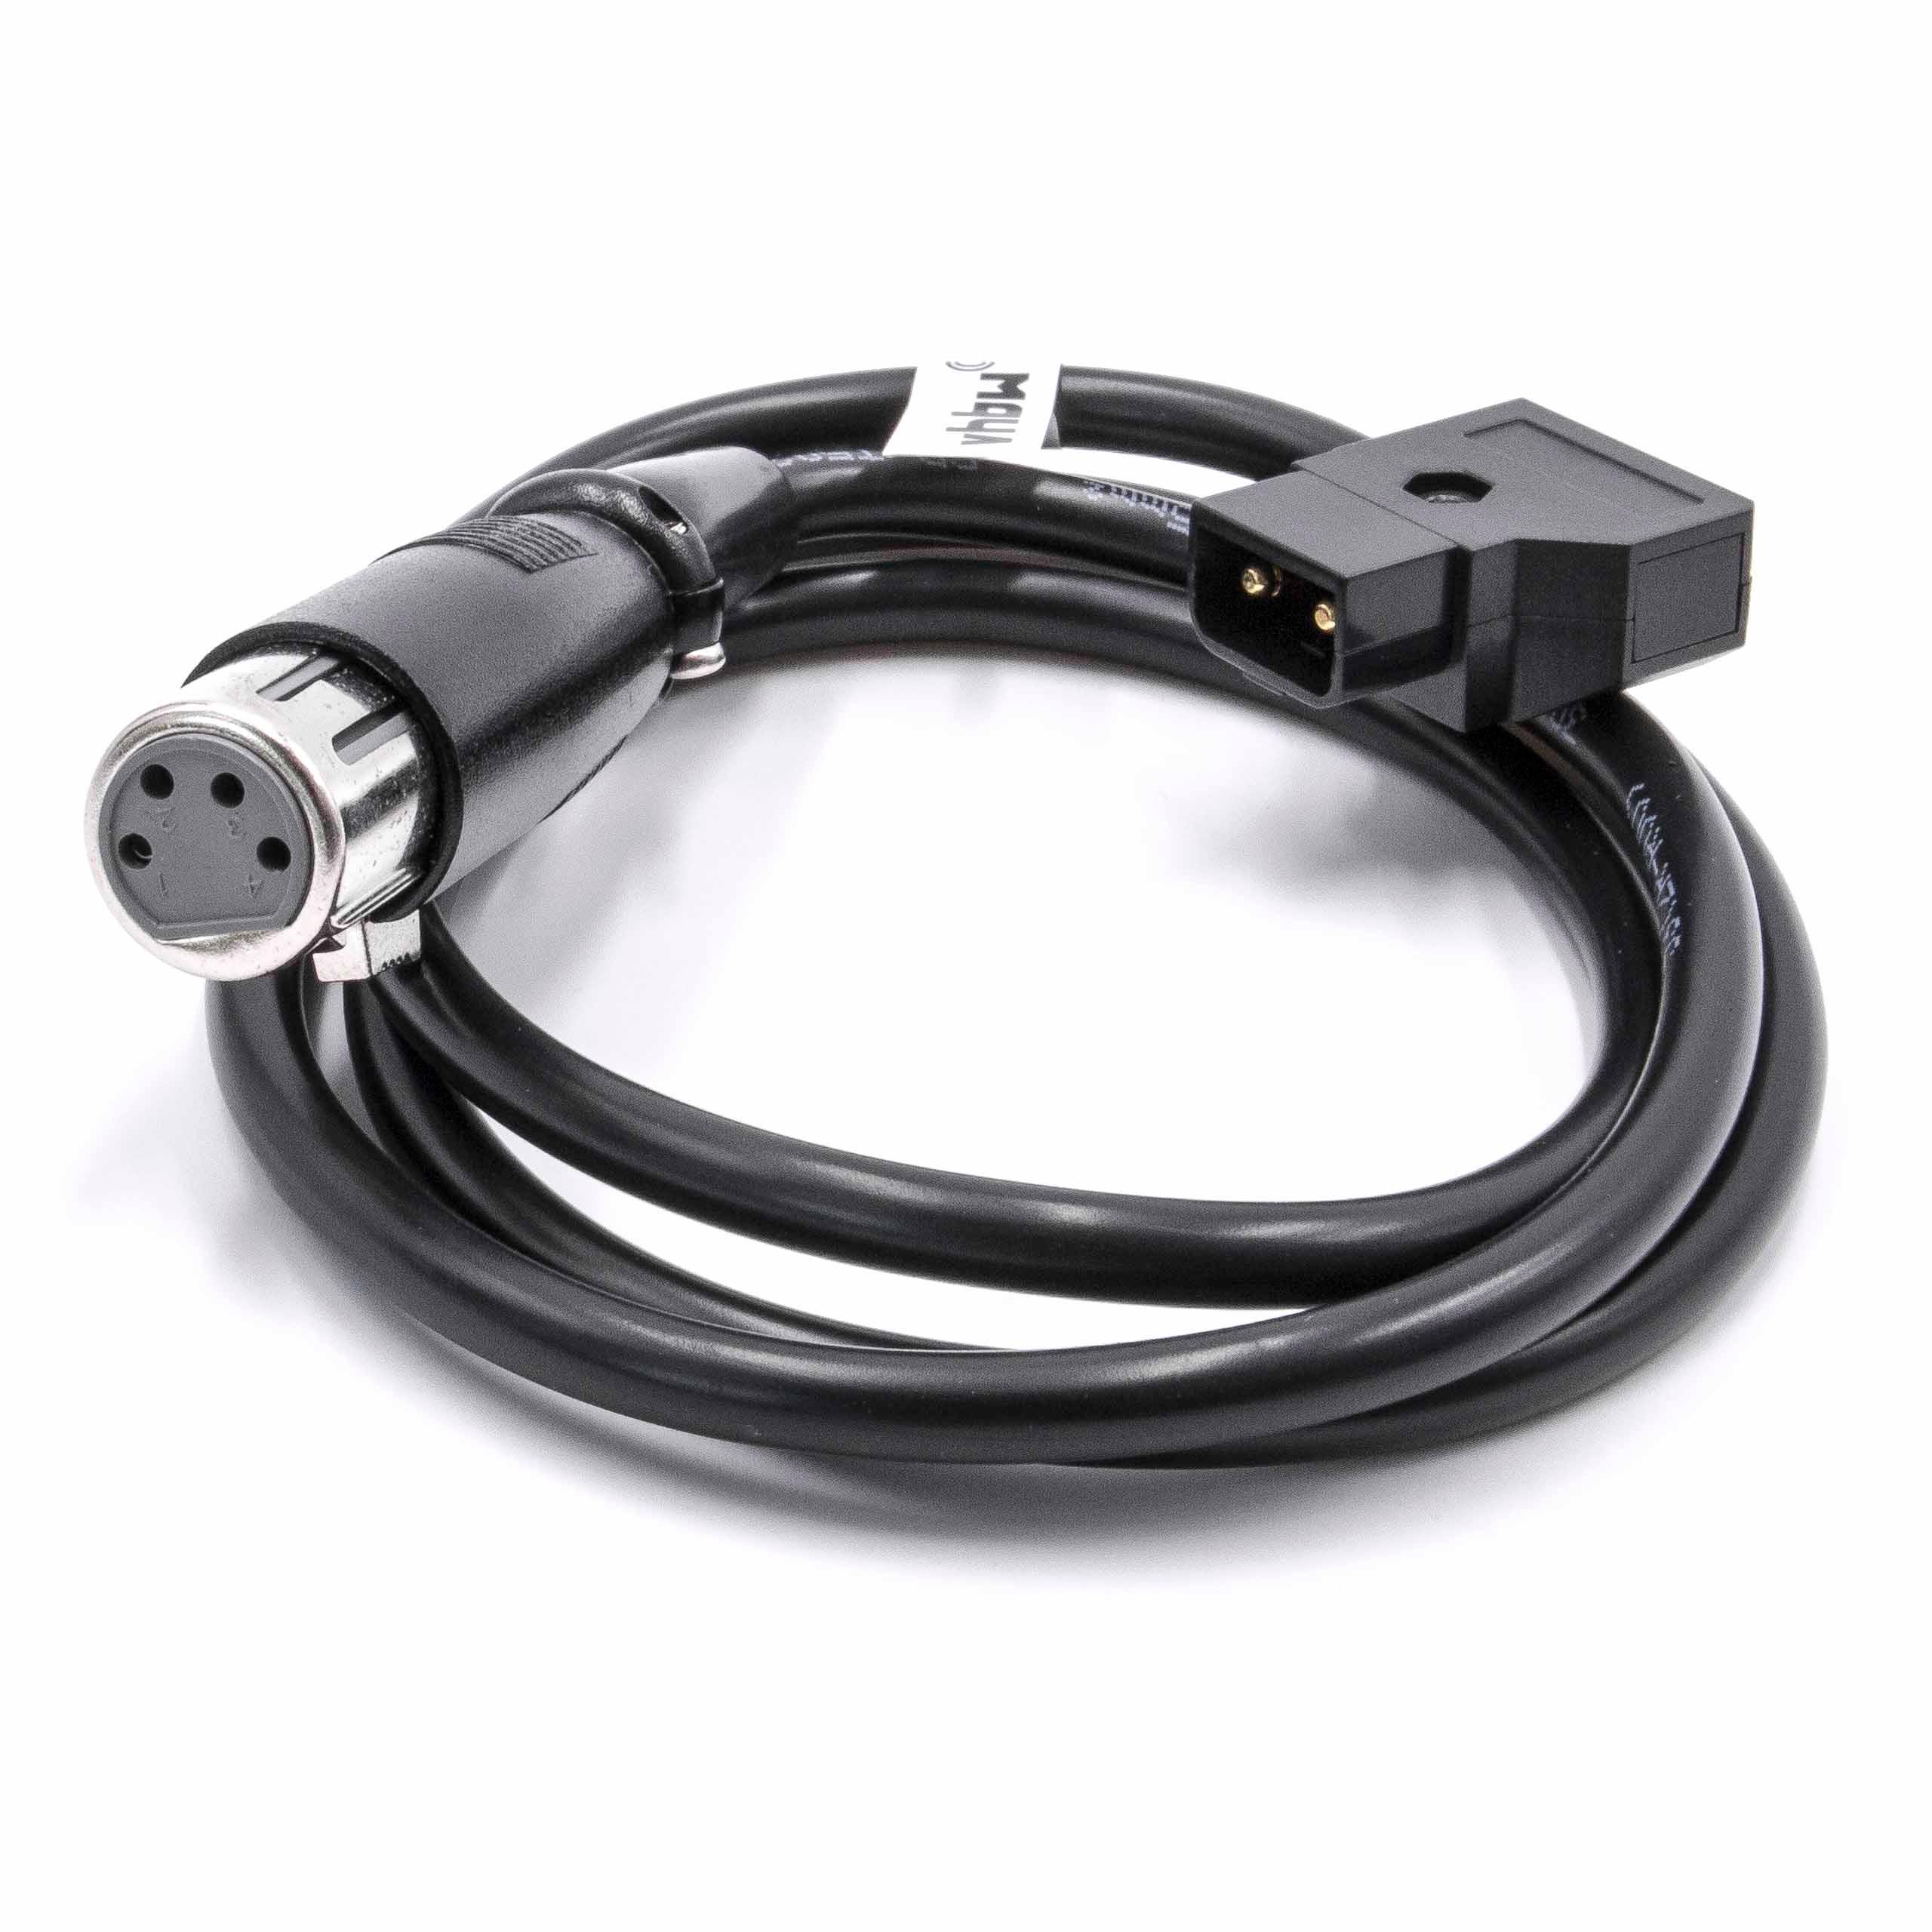 Adapter Cable D-Tap (male) to XLR 4-Pin suitable for Anton Bauer D-Tap, Dionic Camera - 1 m Black